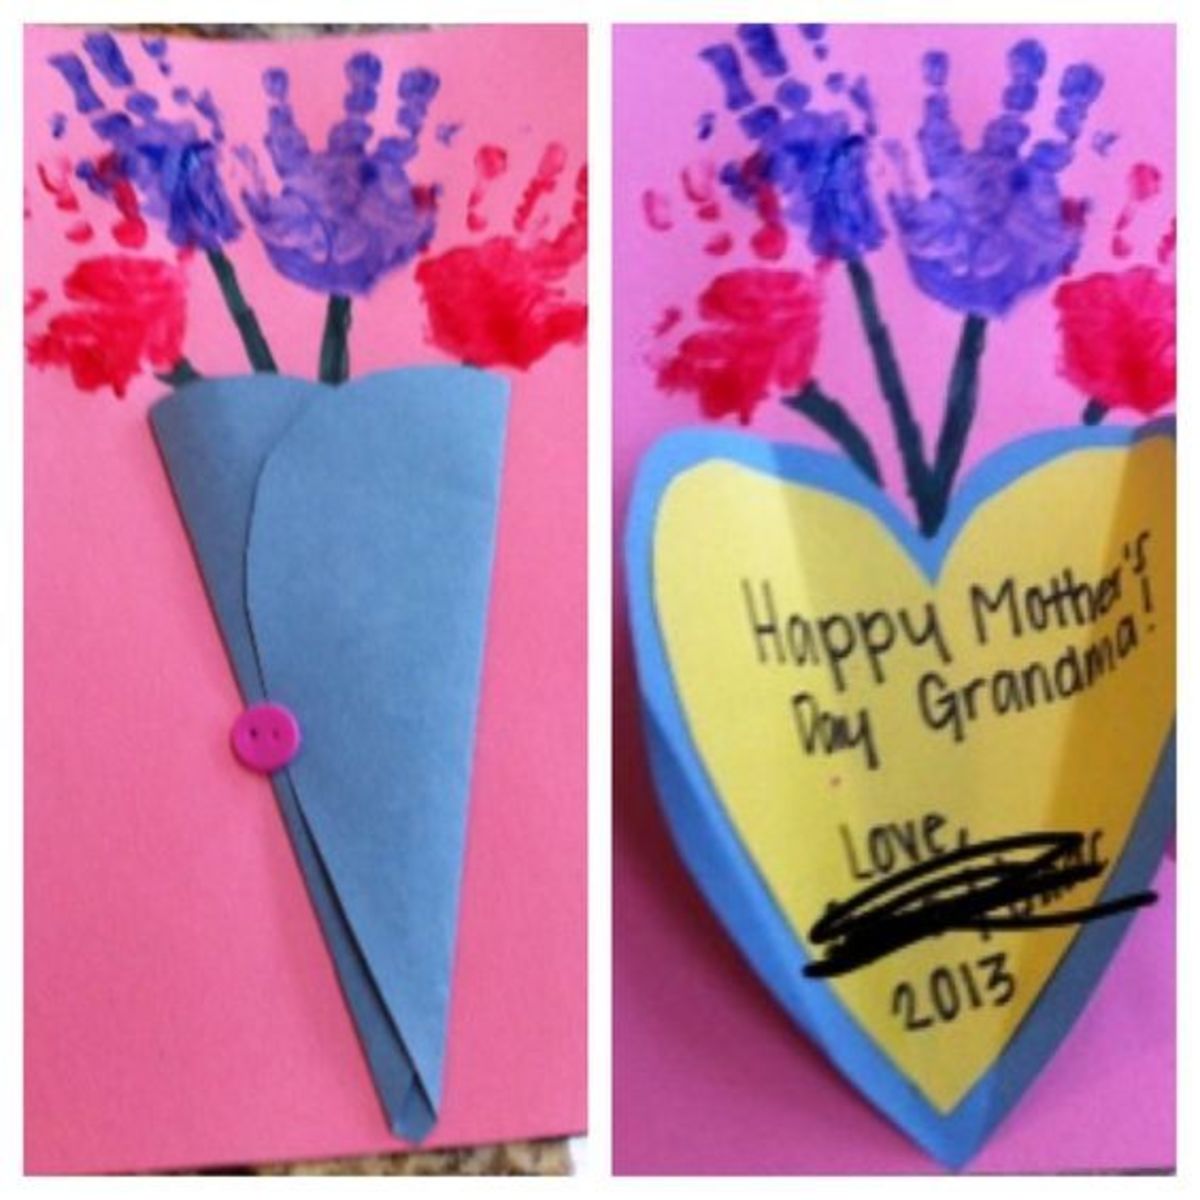 mothers-day-crafts-for-grandma